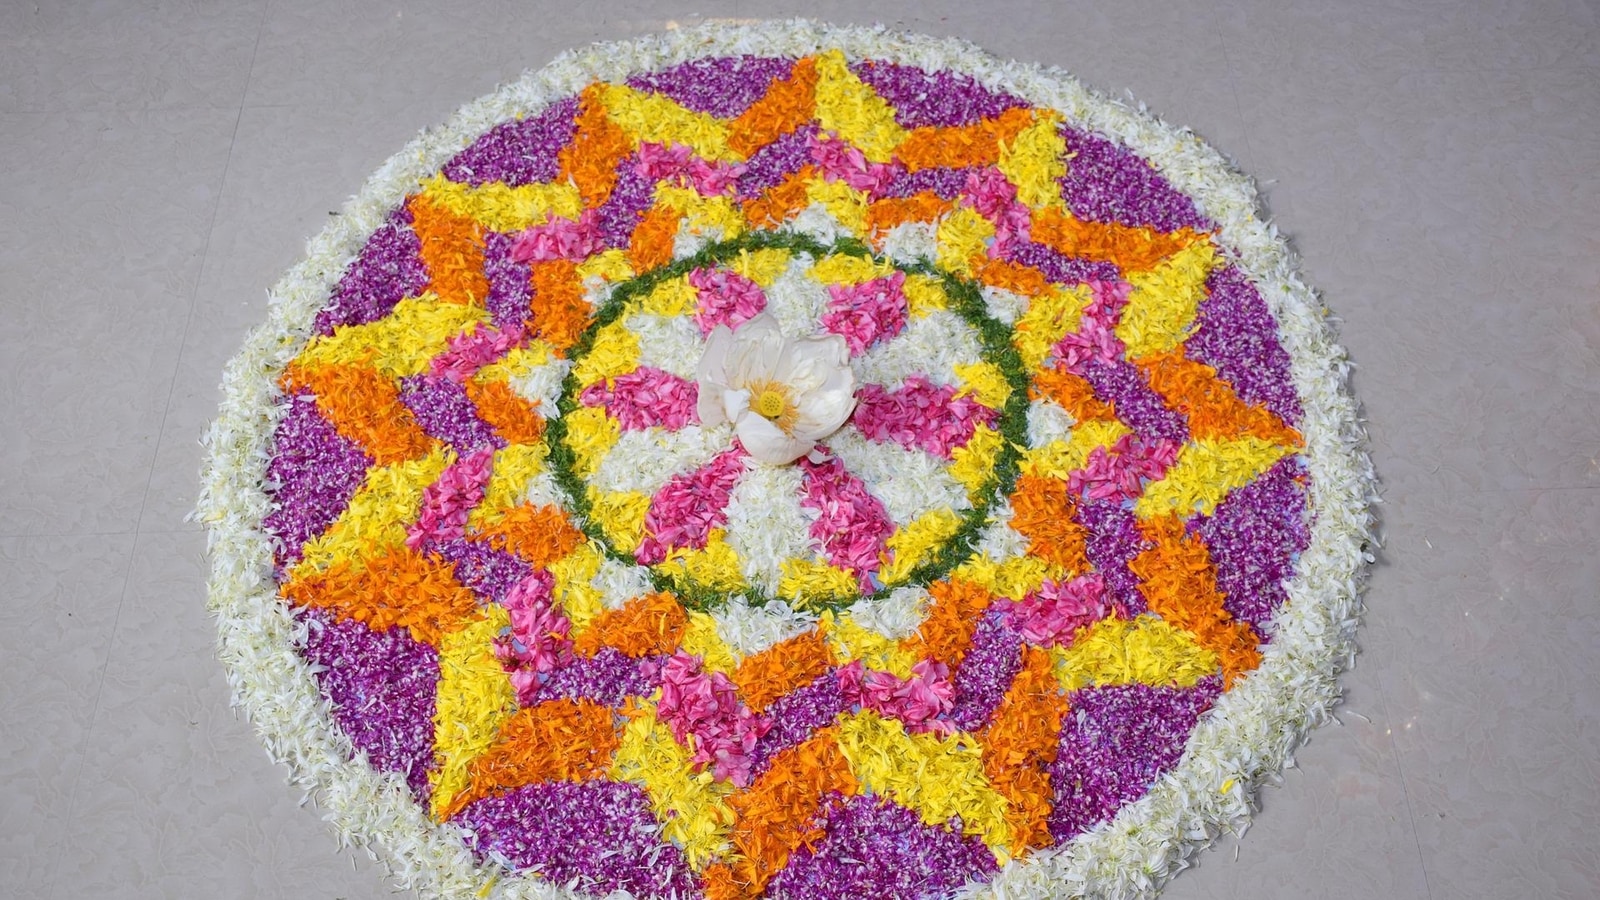 Onam pookalam design outlines 2022 Onam pookalam designs for Competitions  Onam 2022 - YouTube